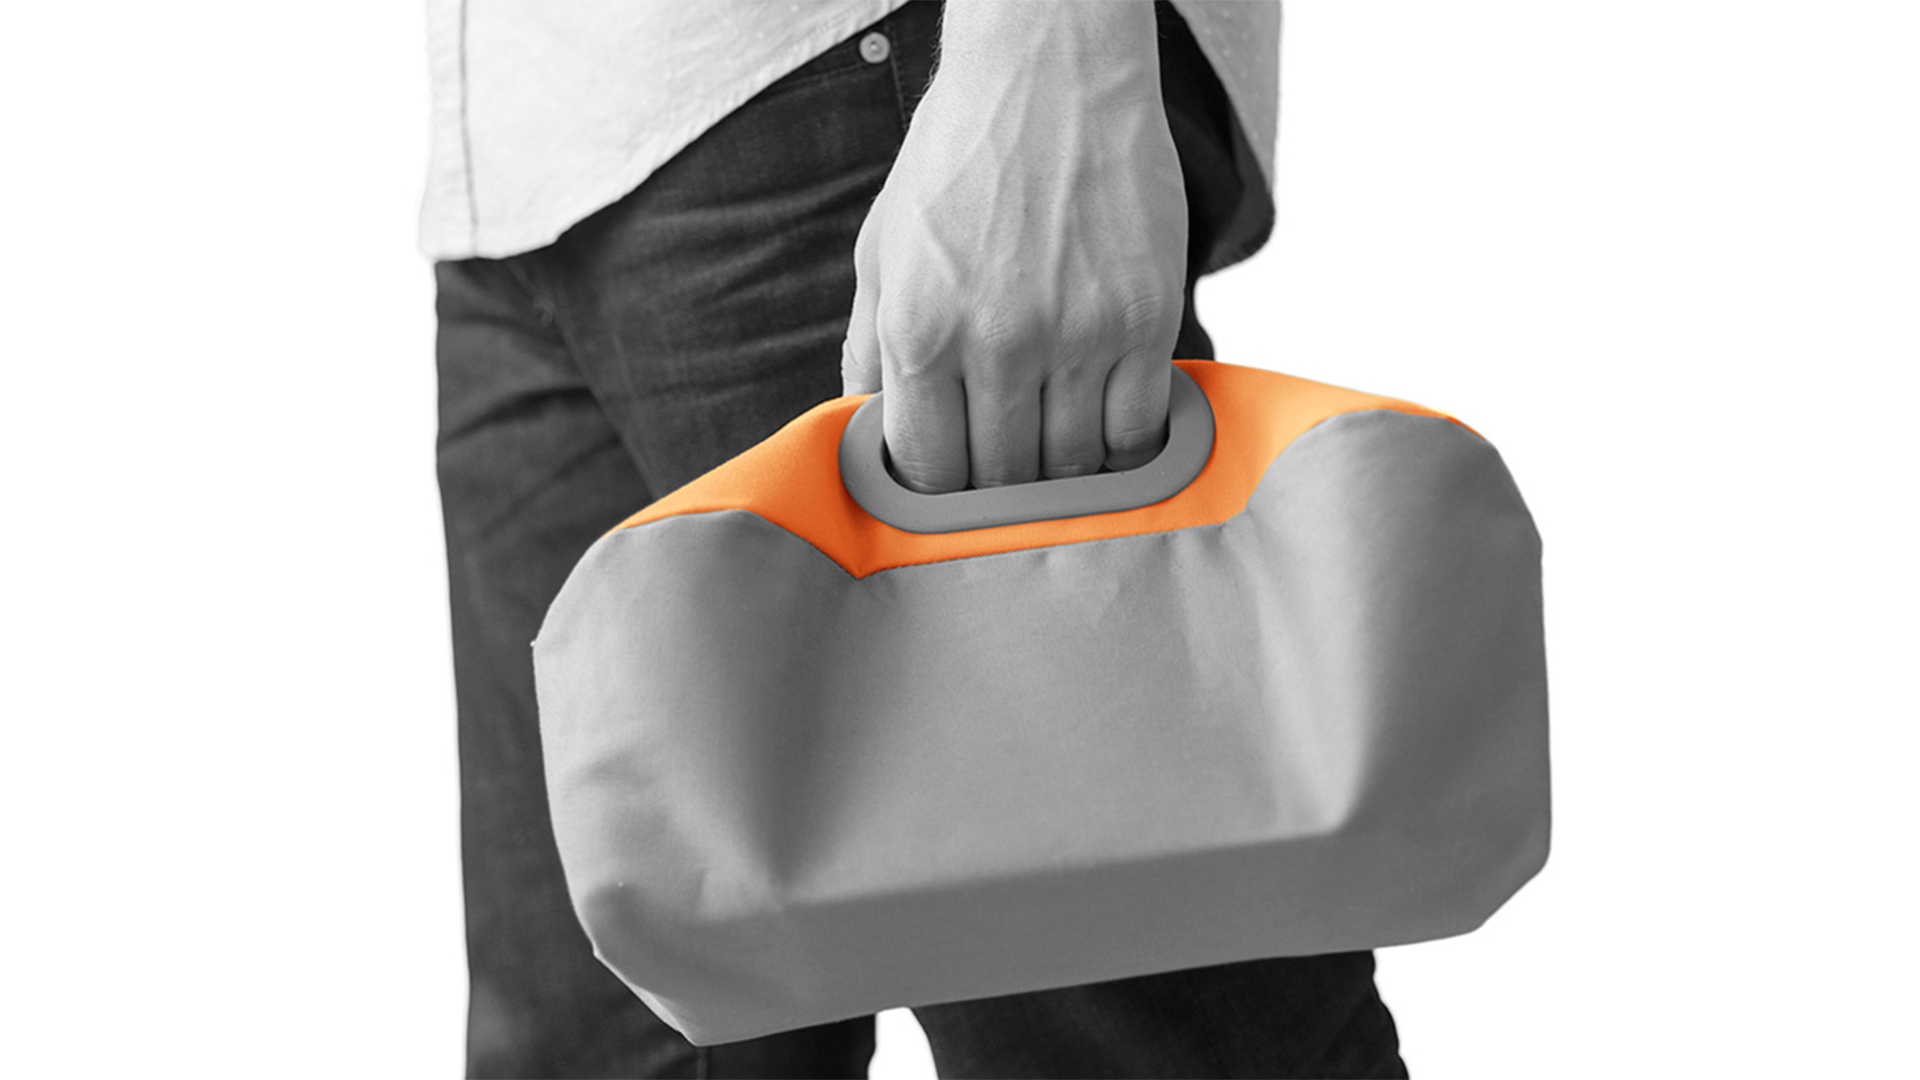 Bag closed with handles for carrying